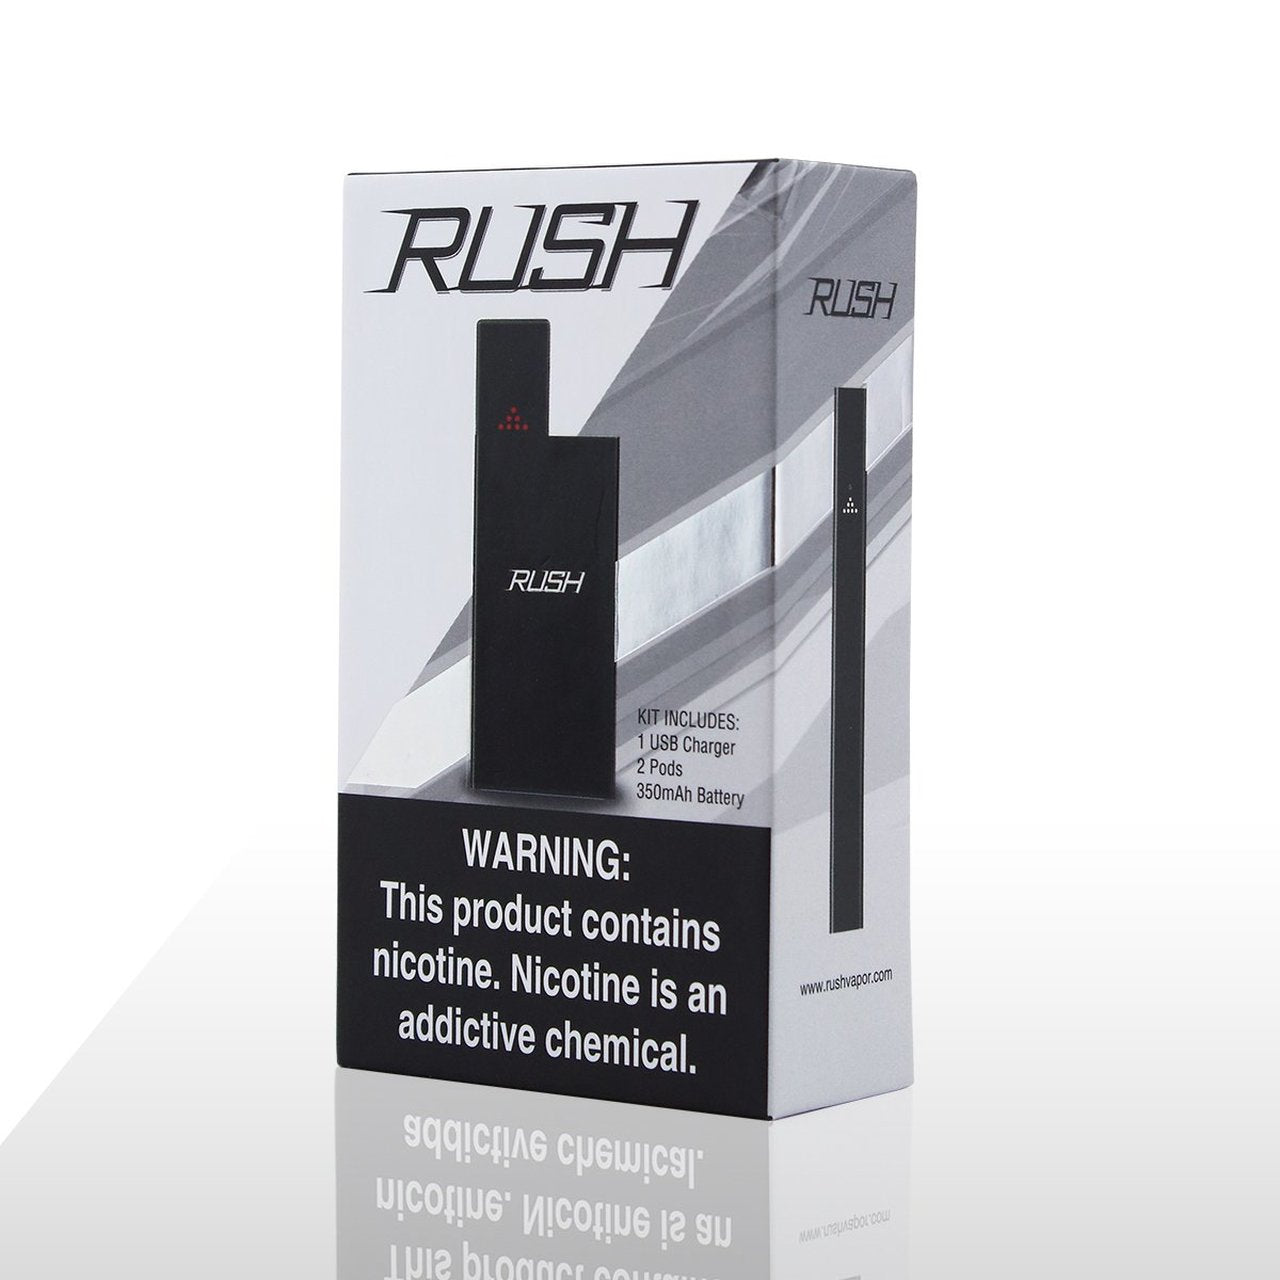 Rush Starter Kit with Juul Compatible Pods